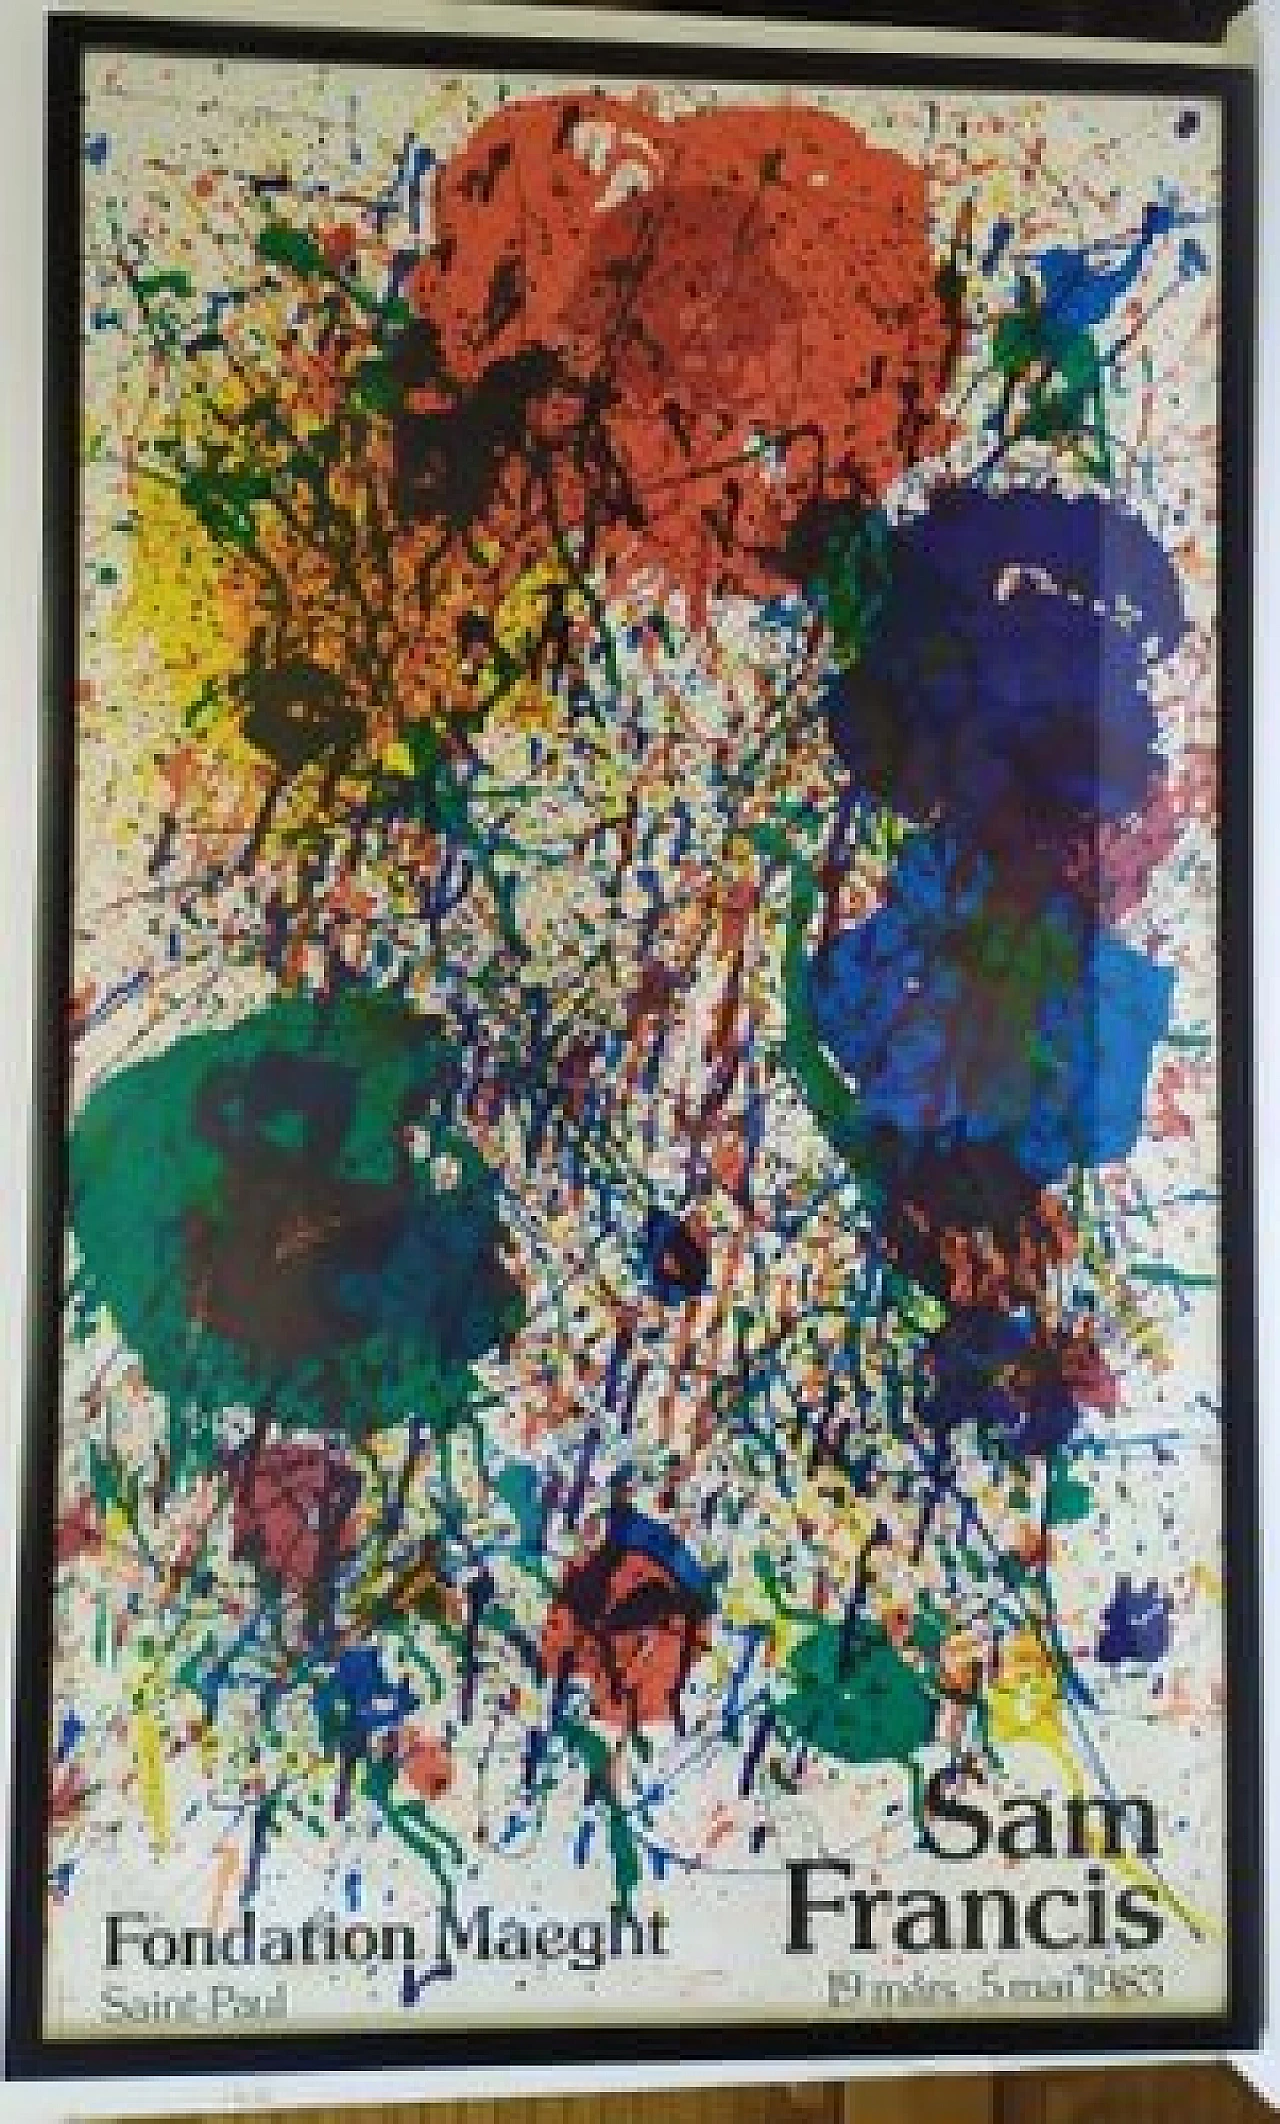 Sam Francis, abstract composition, lithography, 1983 7